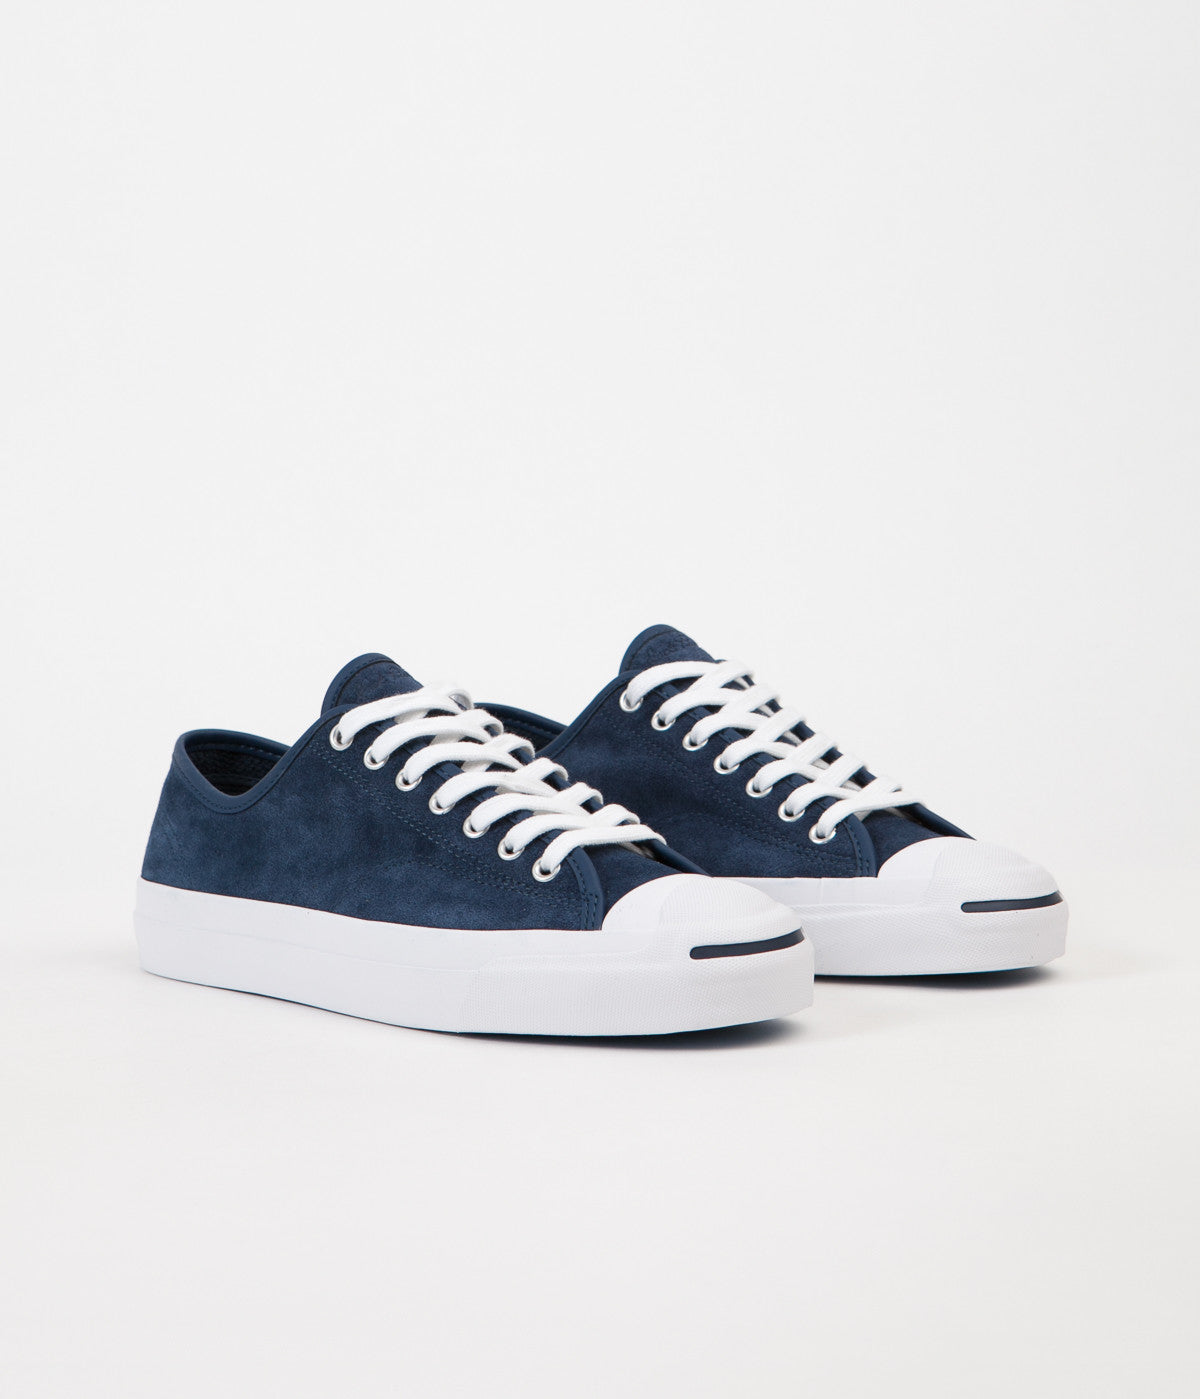 converse jack polar purcell pro shoes navy ox jp